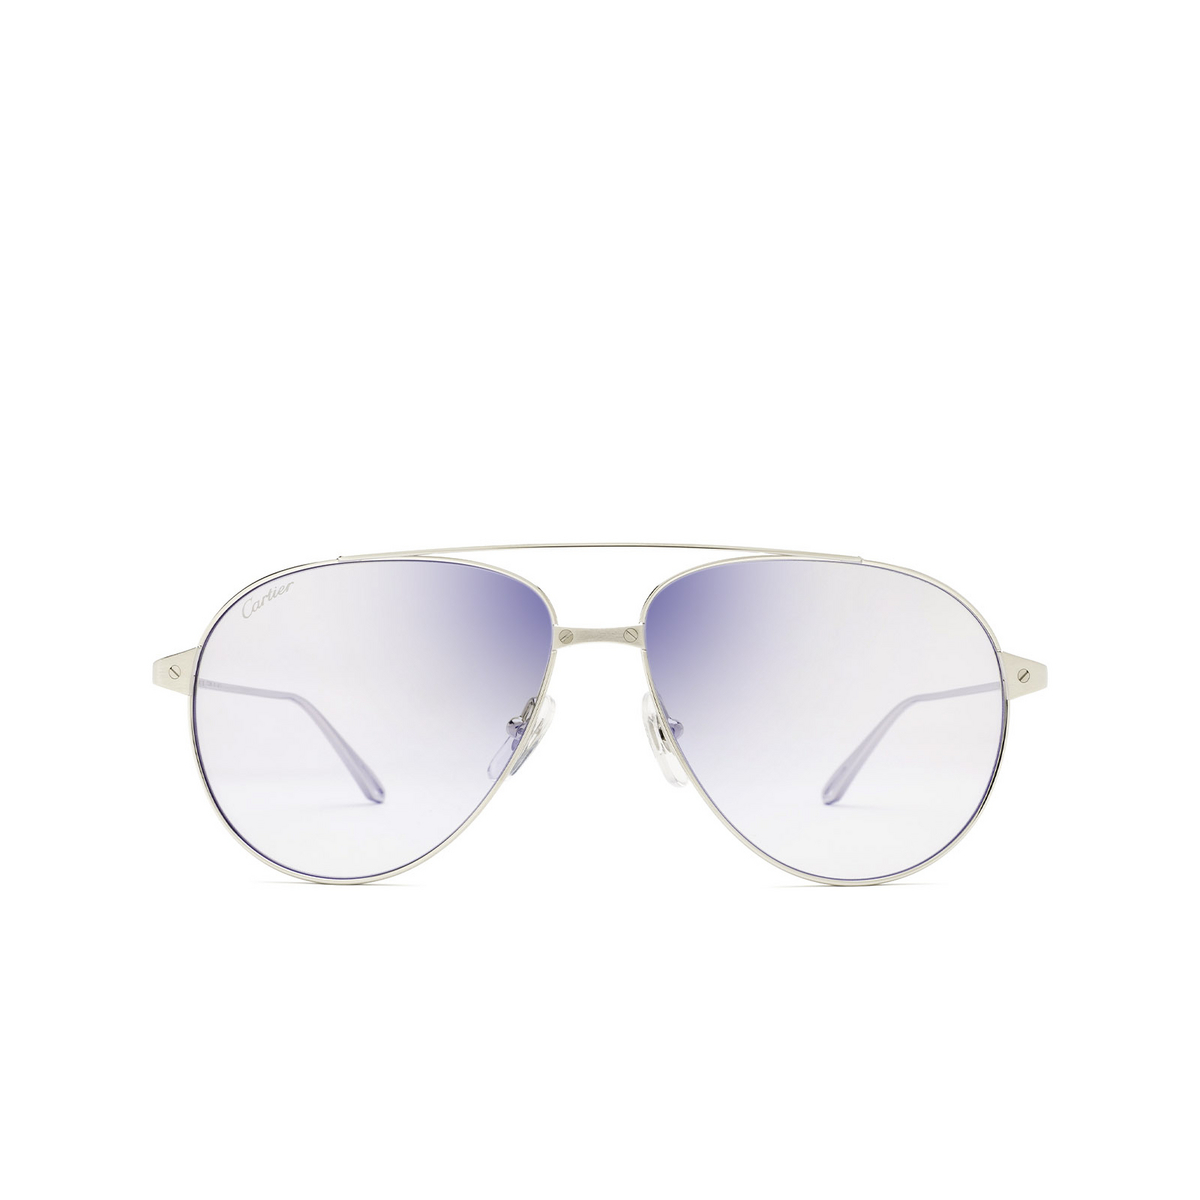 Cartier® Aviator Sunglasses: CT0298S color Silver 011 - front view.